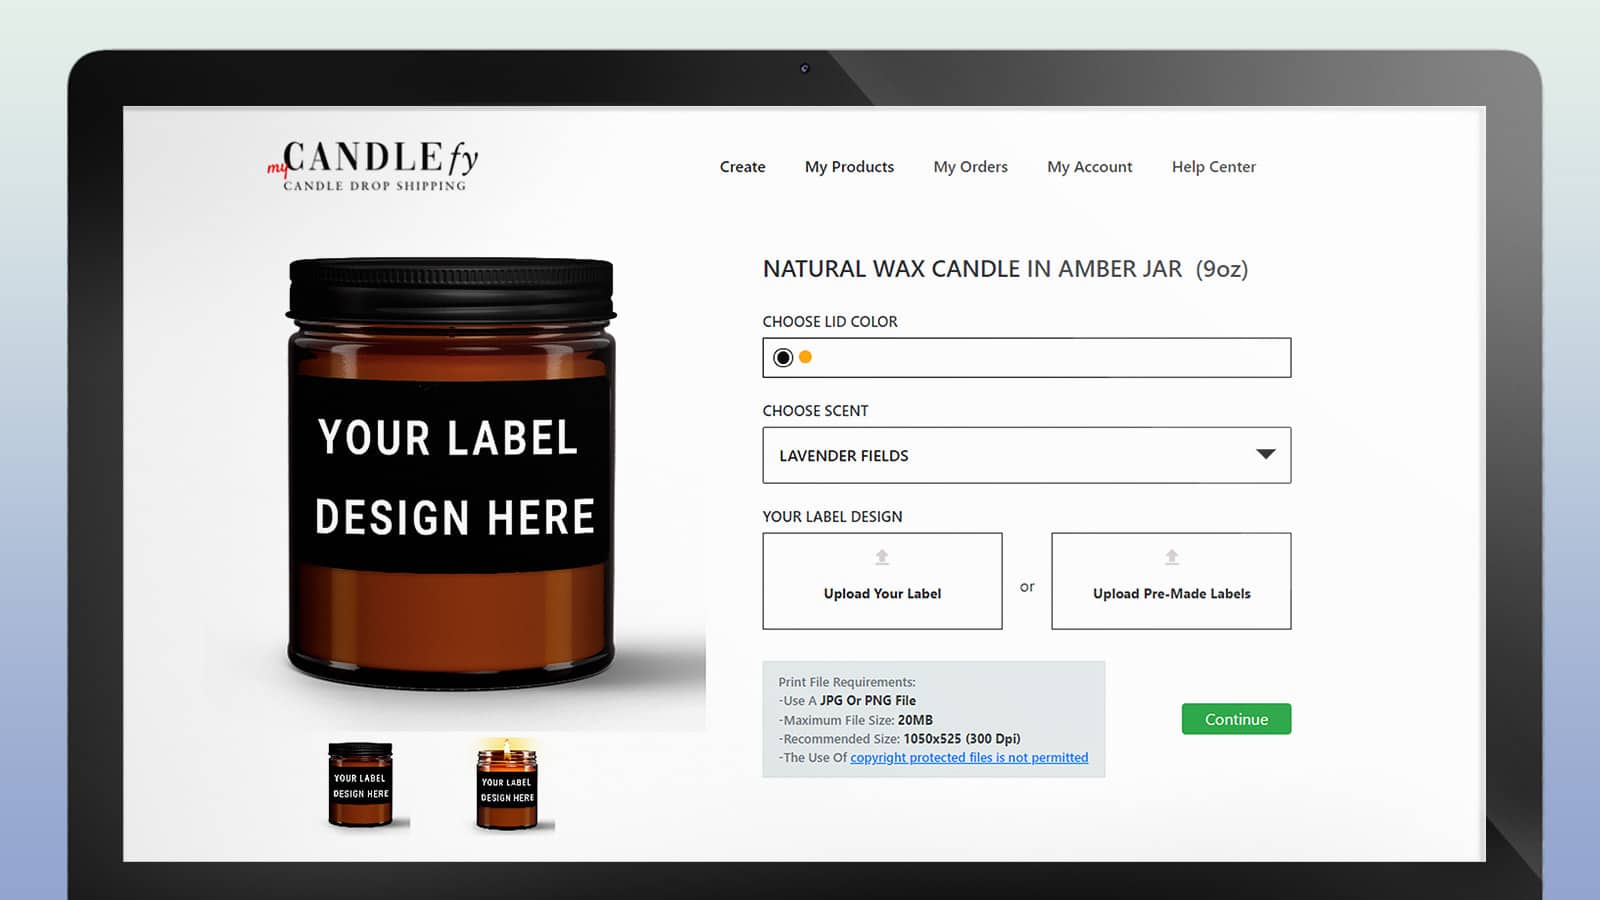 Candlefy: Candle Drop Shipping